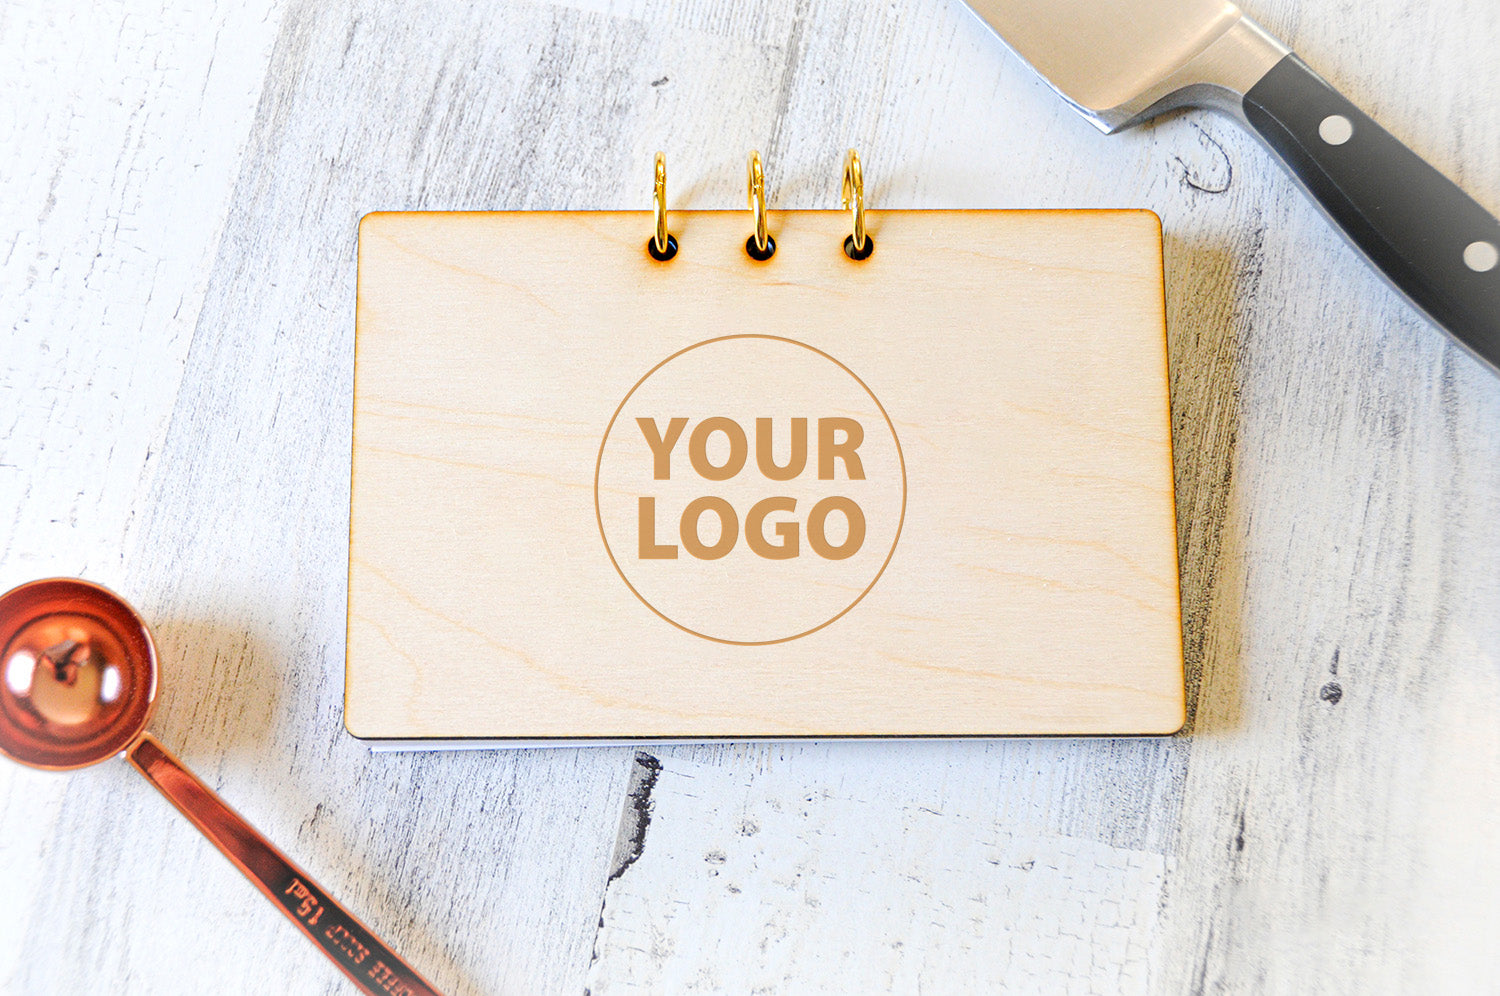 Your LOGO, Custom Recipe Card Binder, 4x6 Personalized with Your